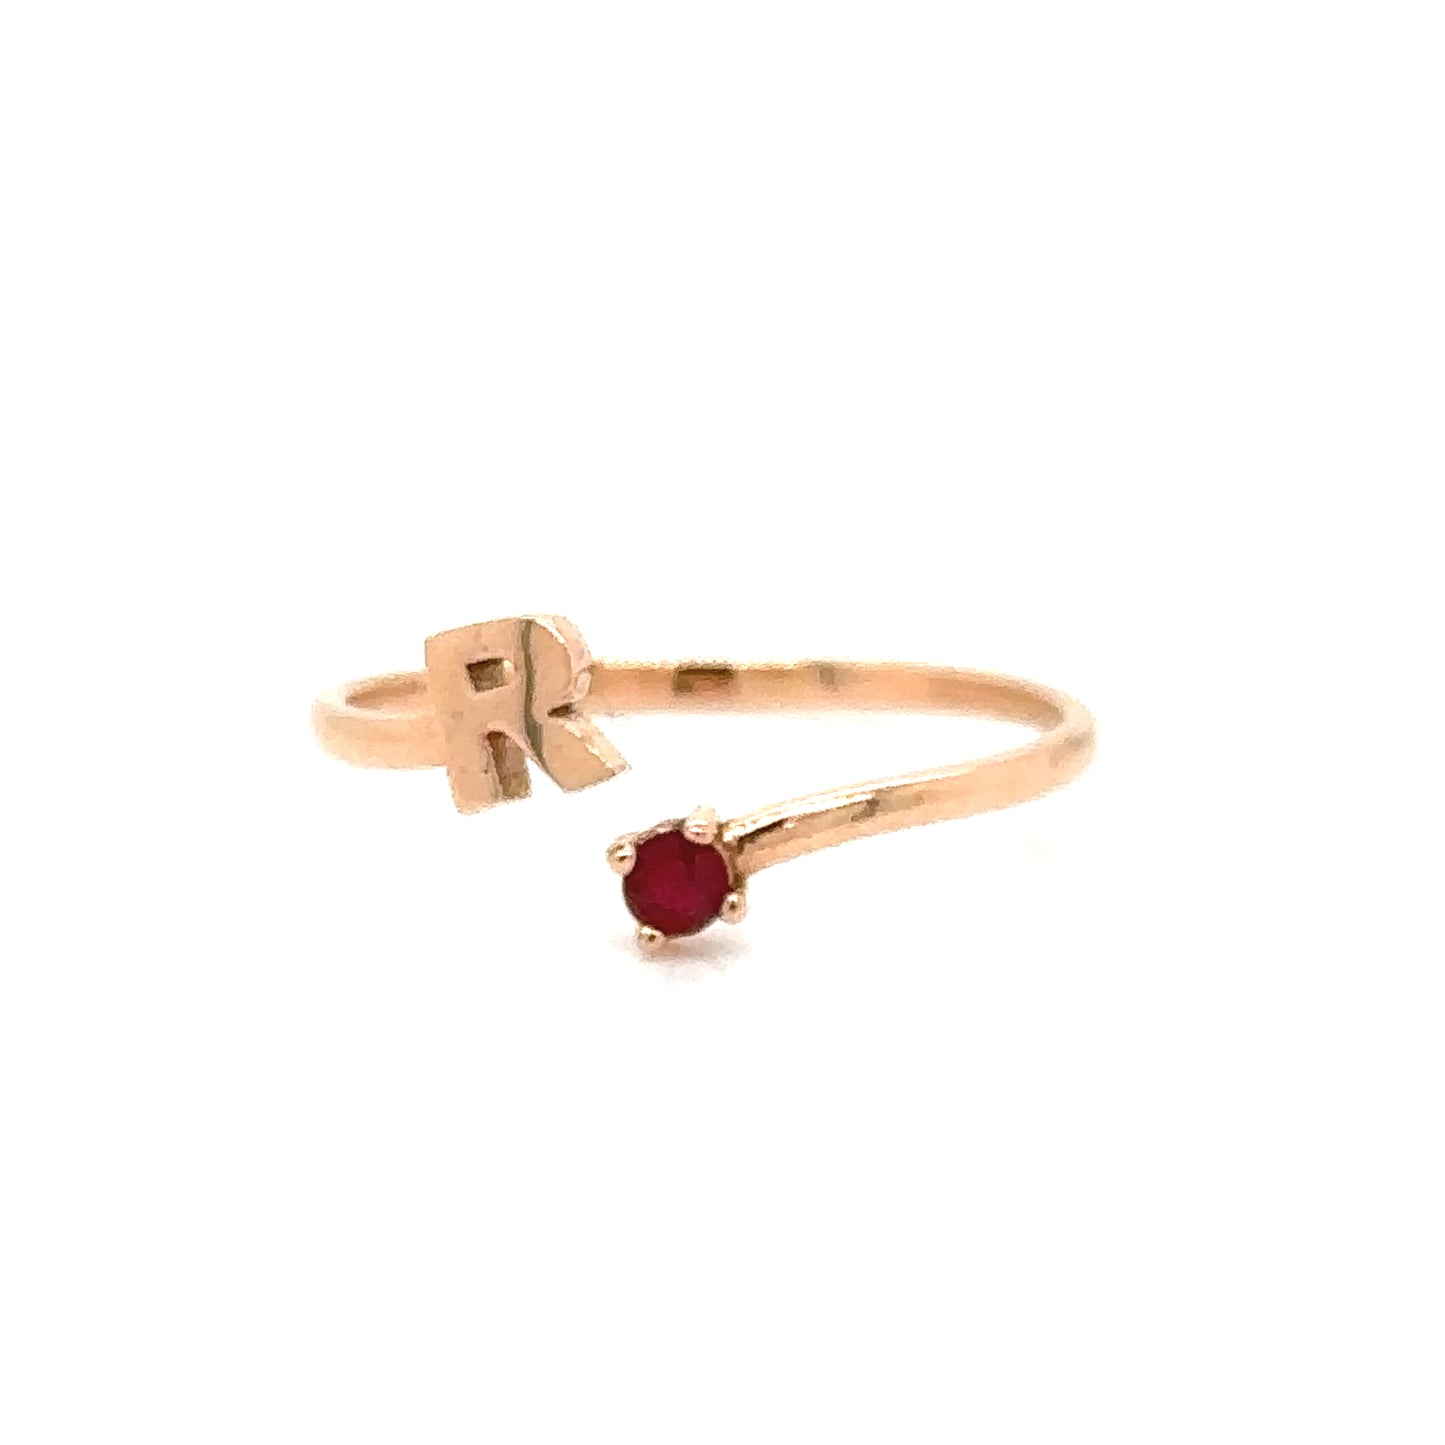 IMMEDIATE DELIVERY / "R" Initial Ring with Ruby / 14k Rose Gold / Size 7.5